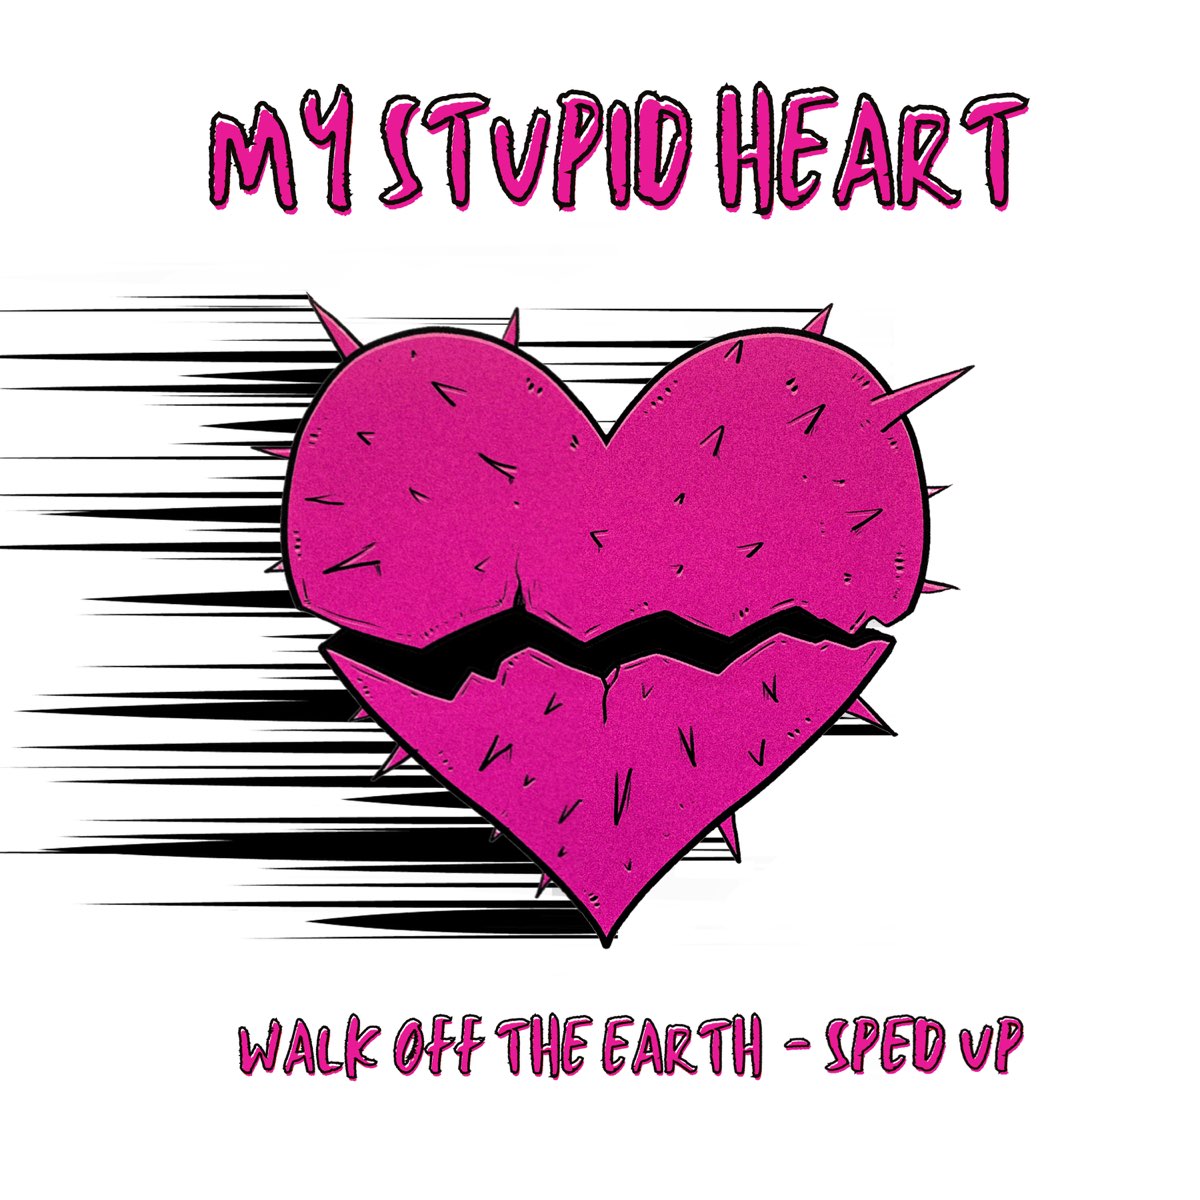 My stupid Heart. Heartbeat (Speed up) слова. September Sparky Deathcap. Heartbeat (Sped up) lucazzz.